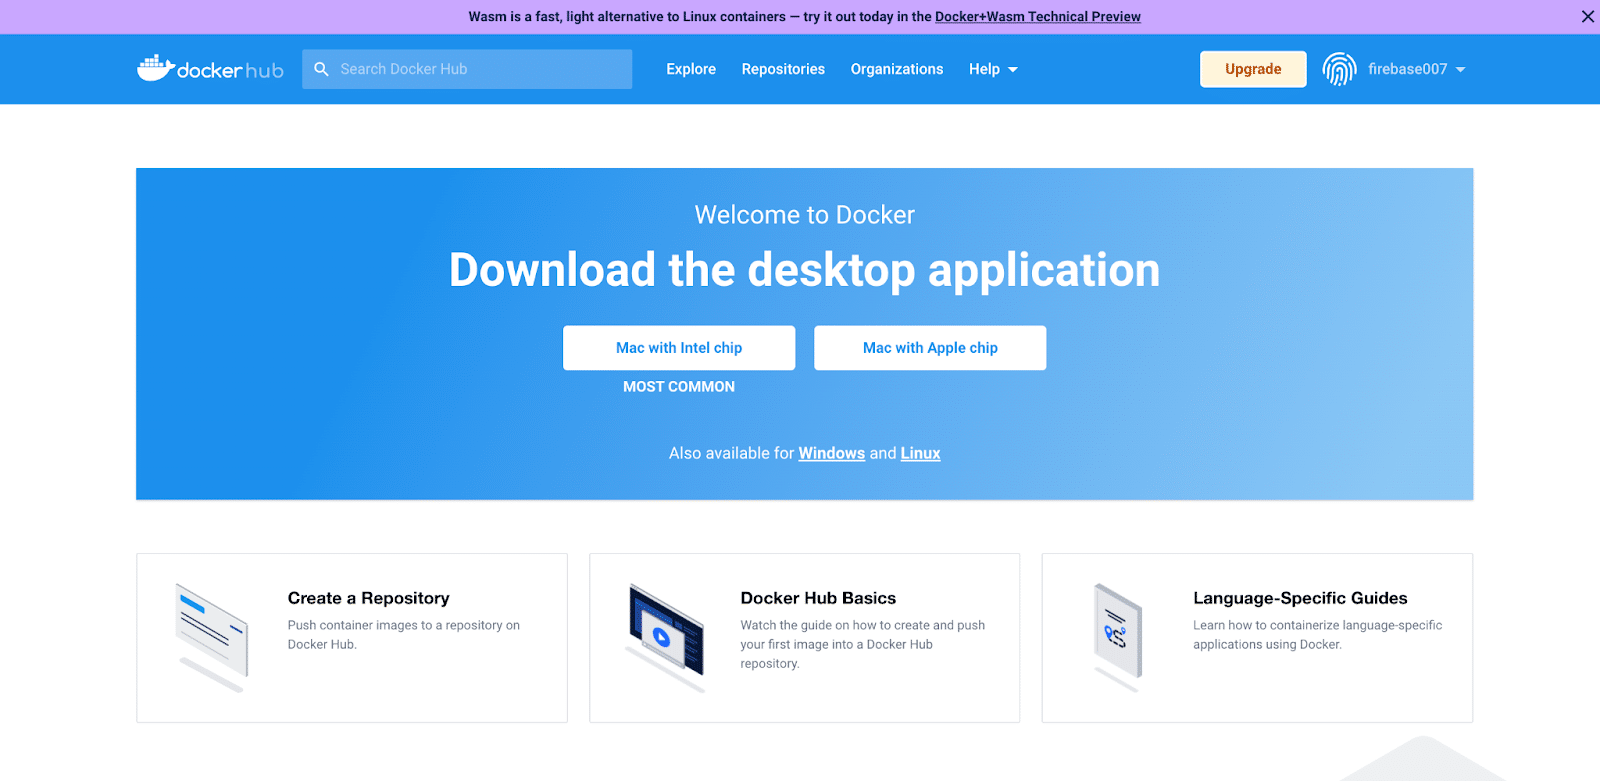 Download page for Docker Desktop with options for operating systems.